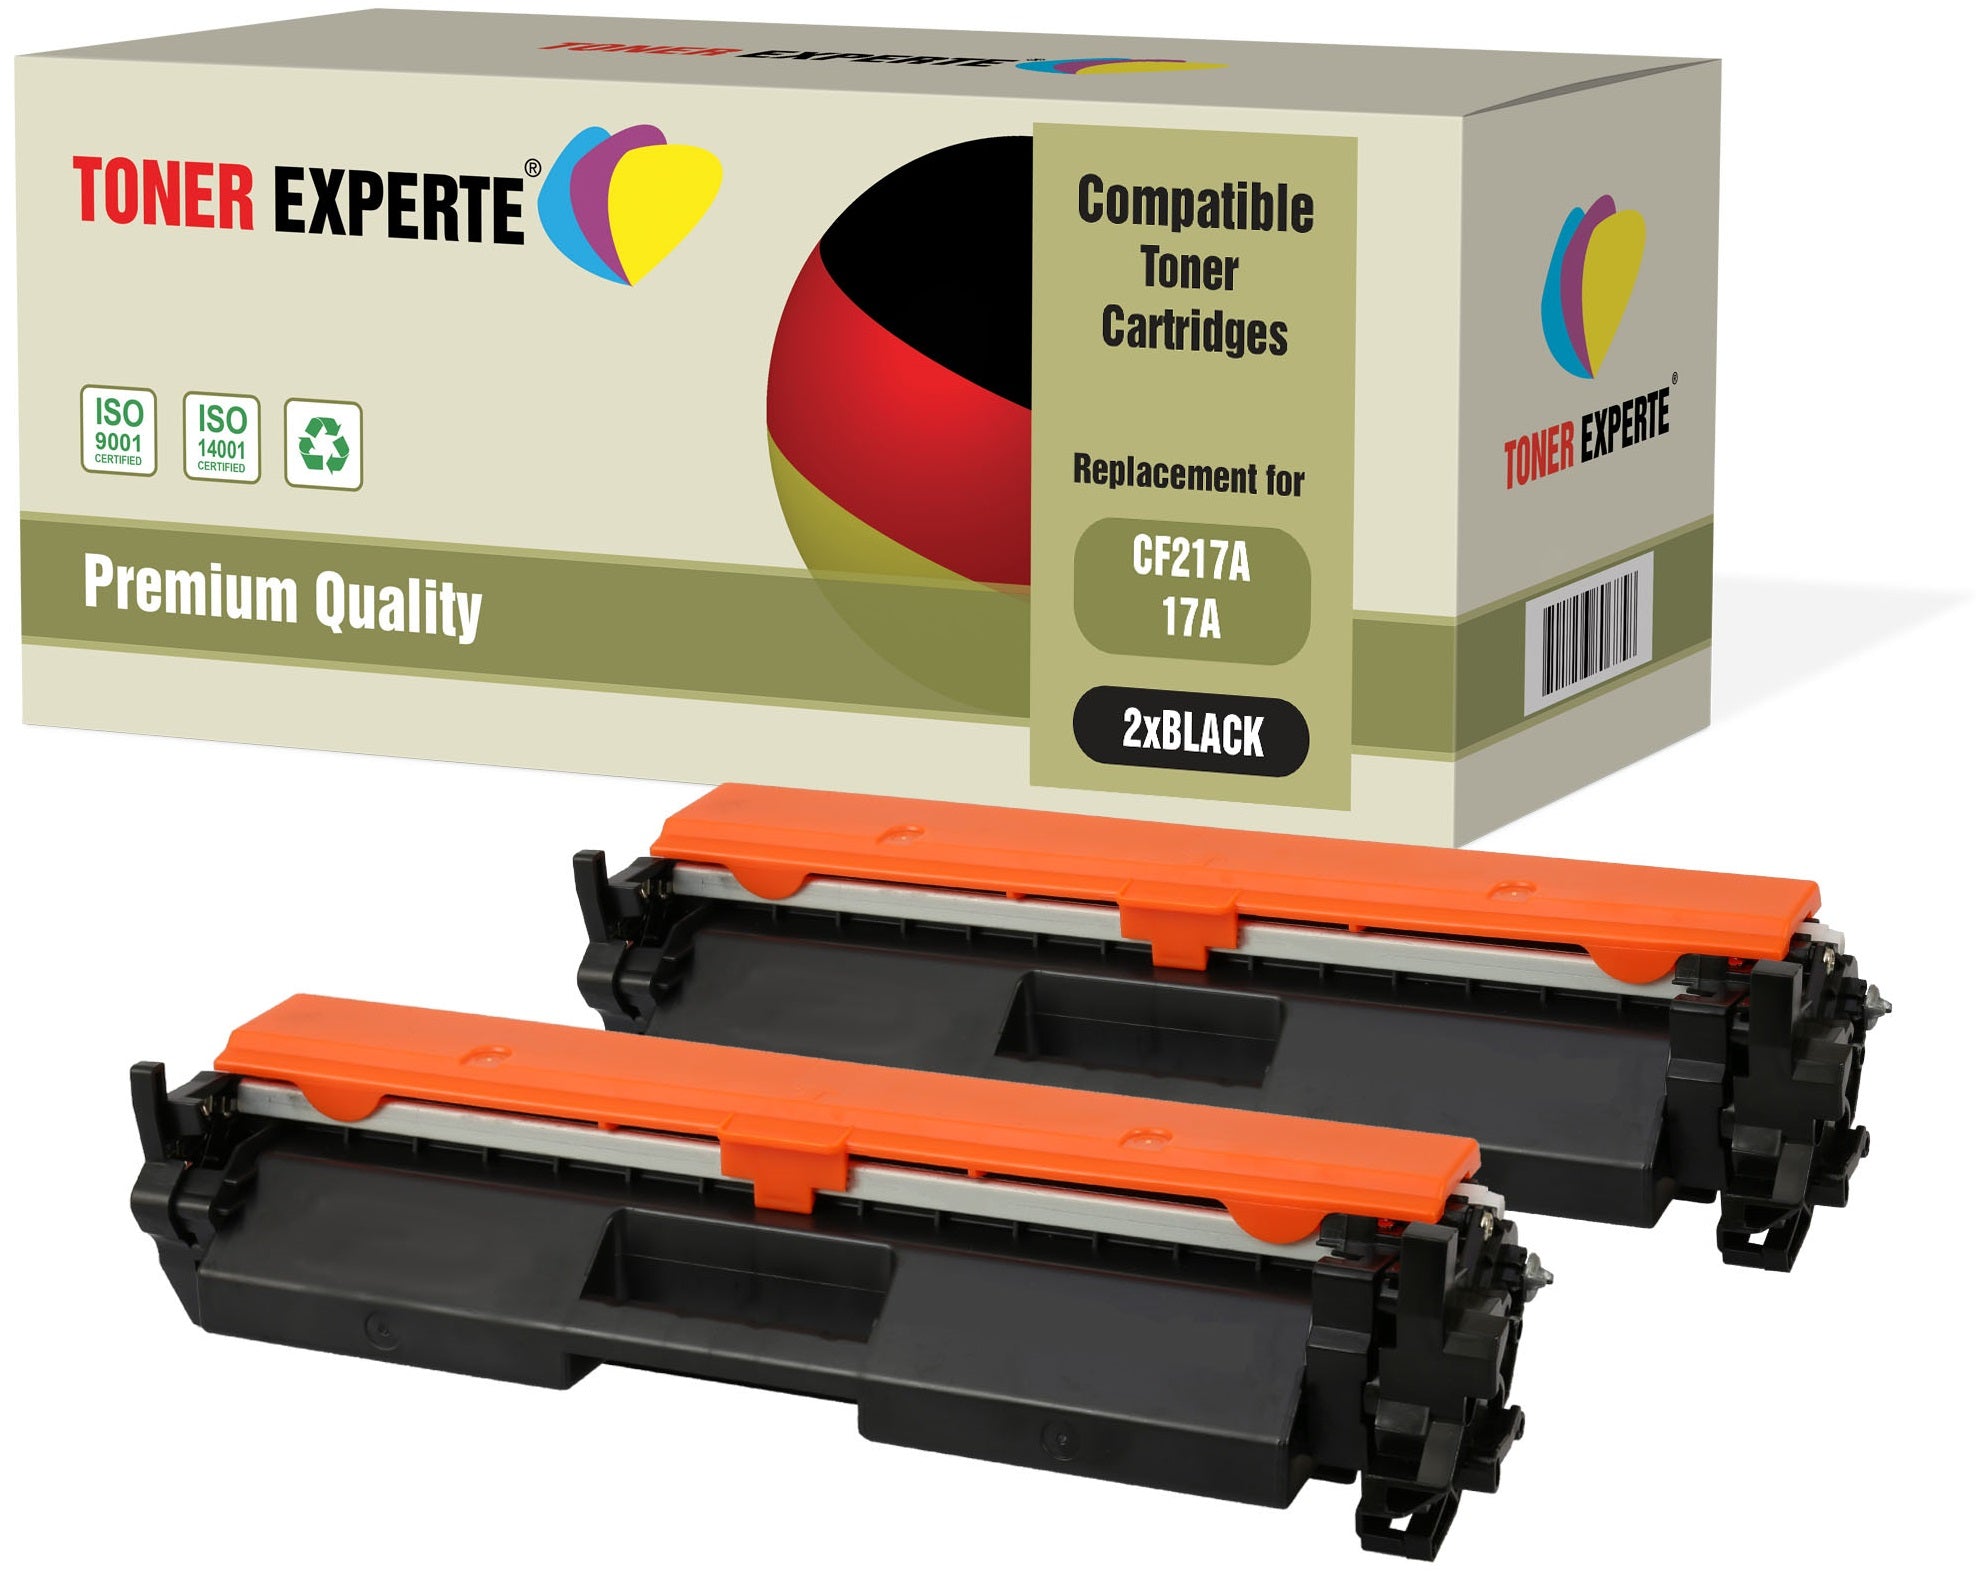 Compatible Toner Cartridge Replacement for HP CF217A 17A - Toner Experte